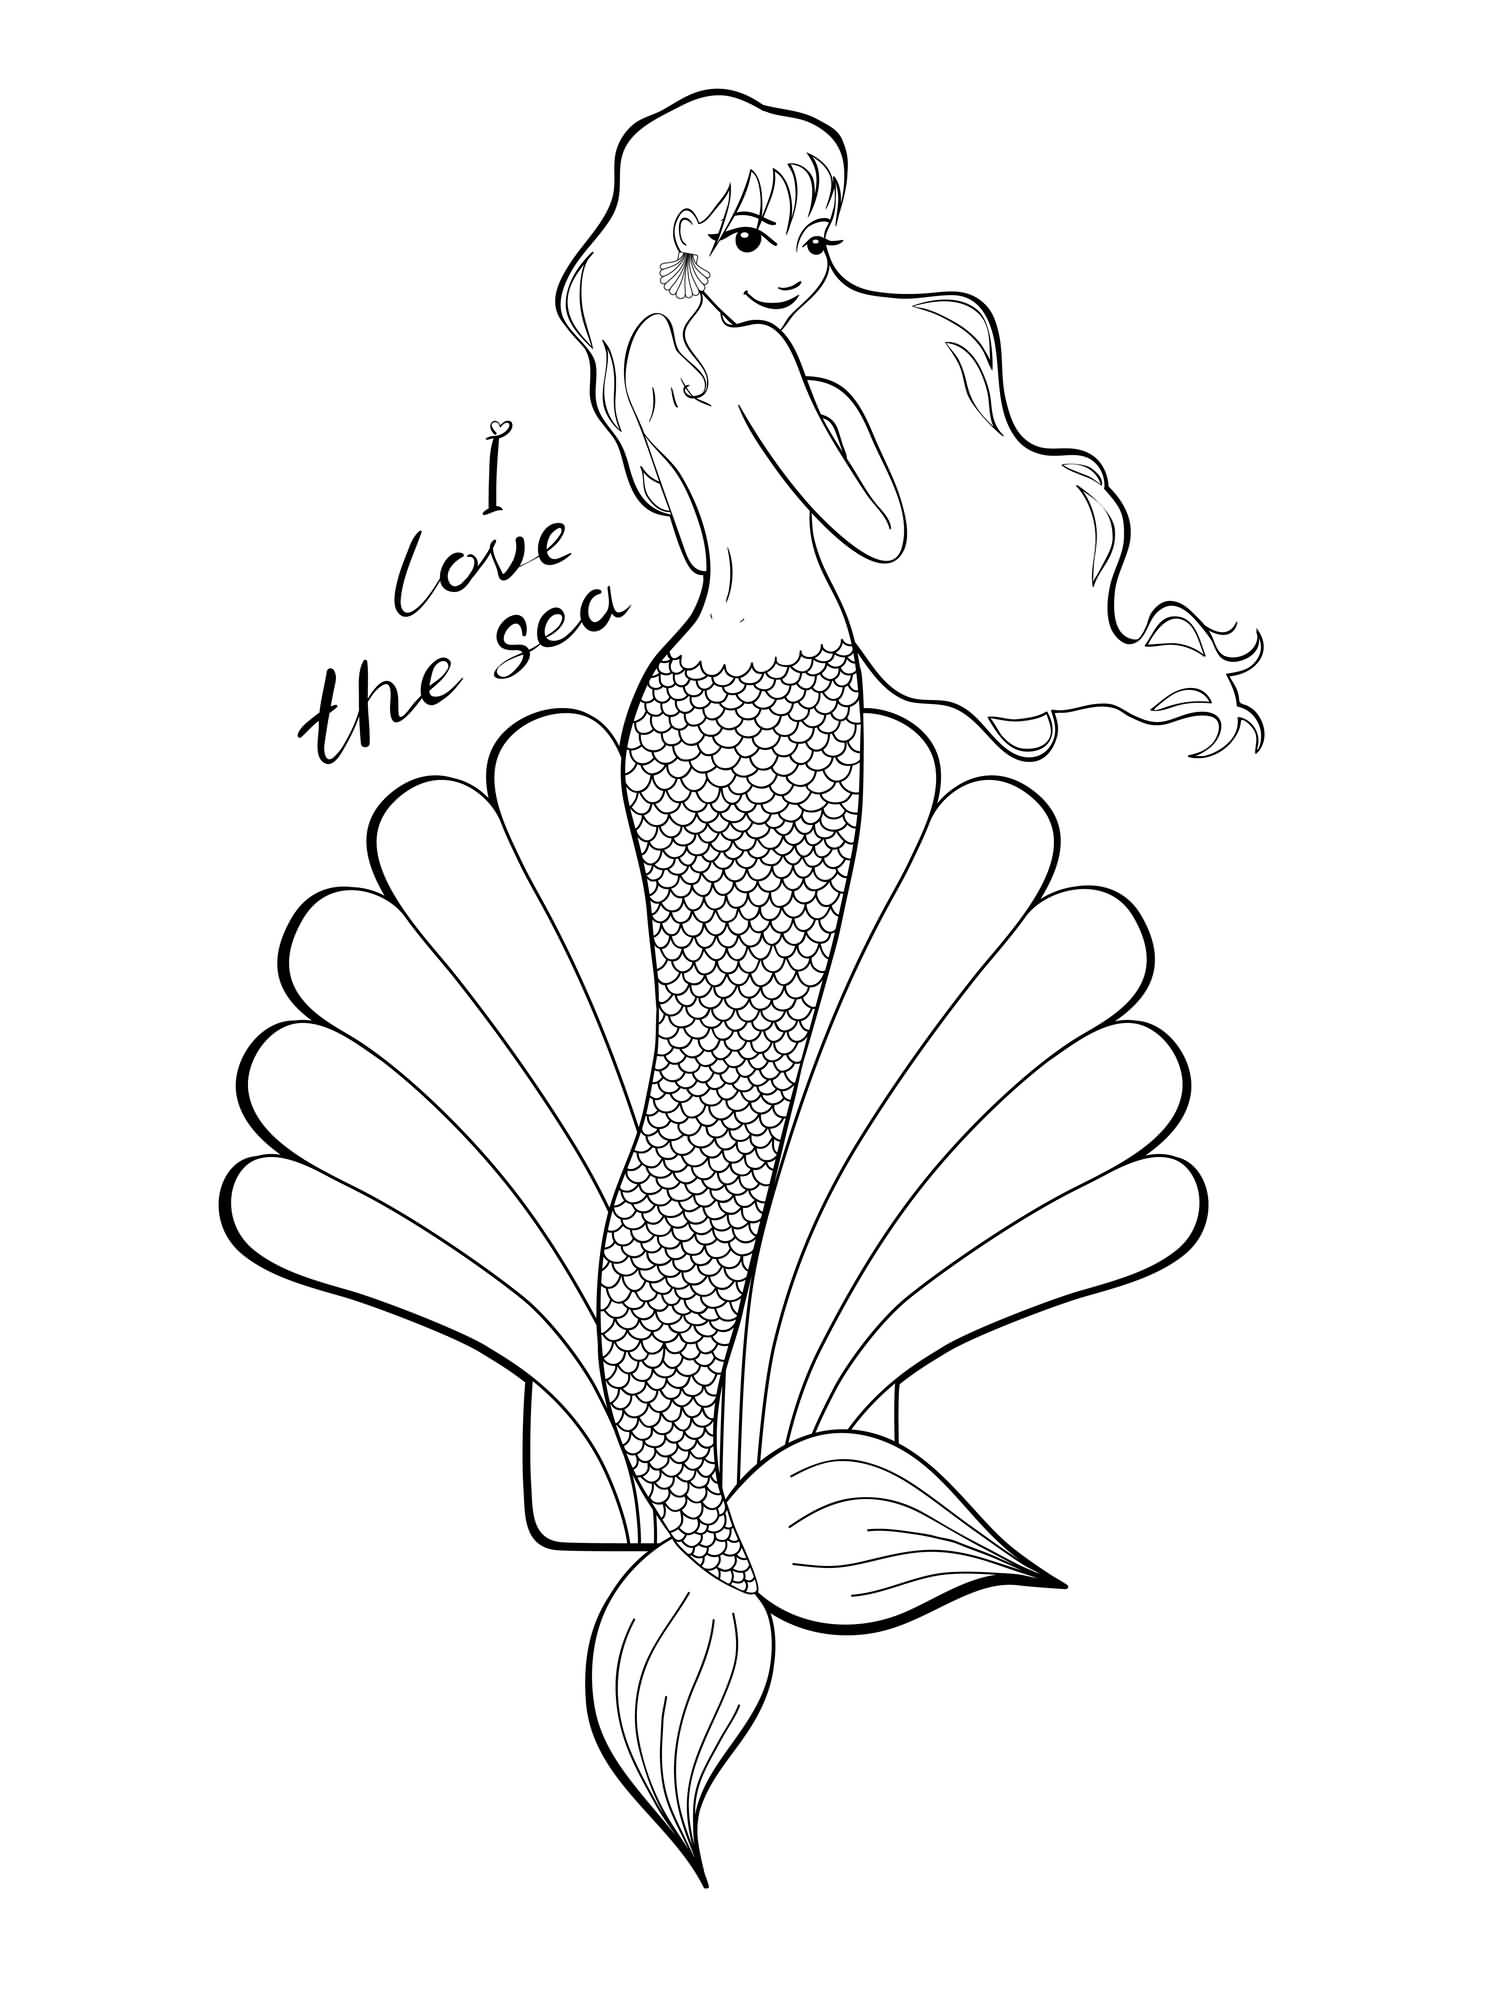 I Love The Sea - Black Outline Mermaid With Shell Tattoo Stencil